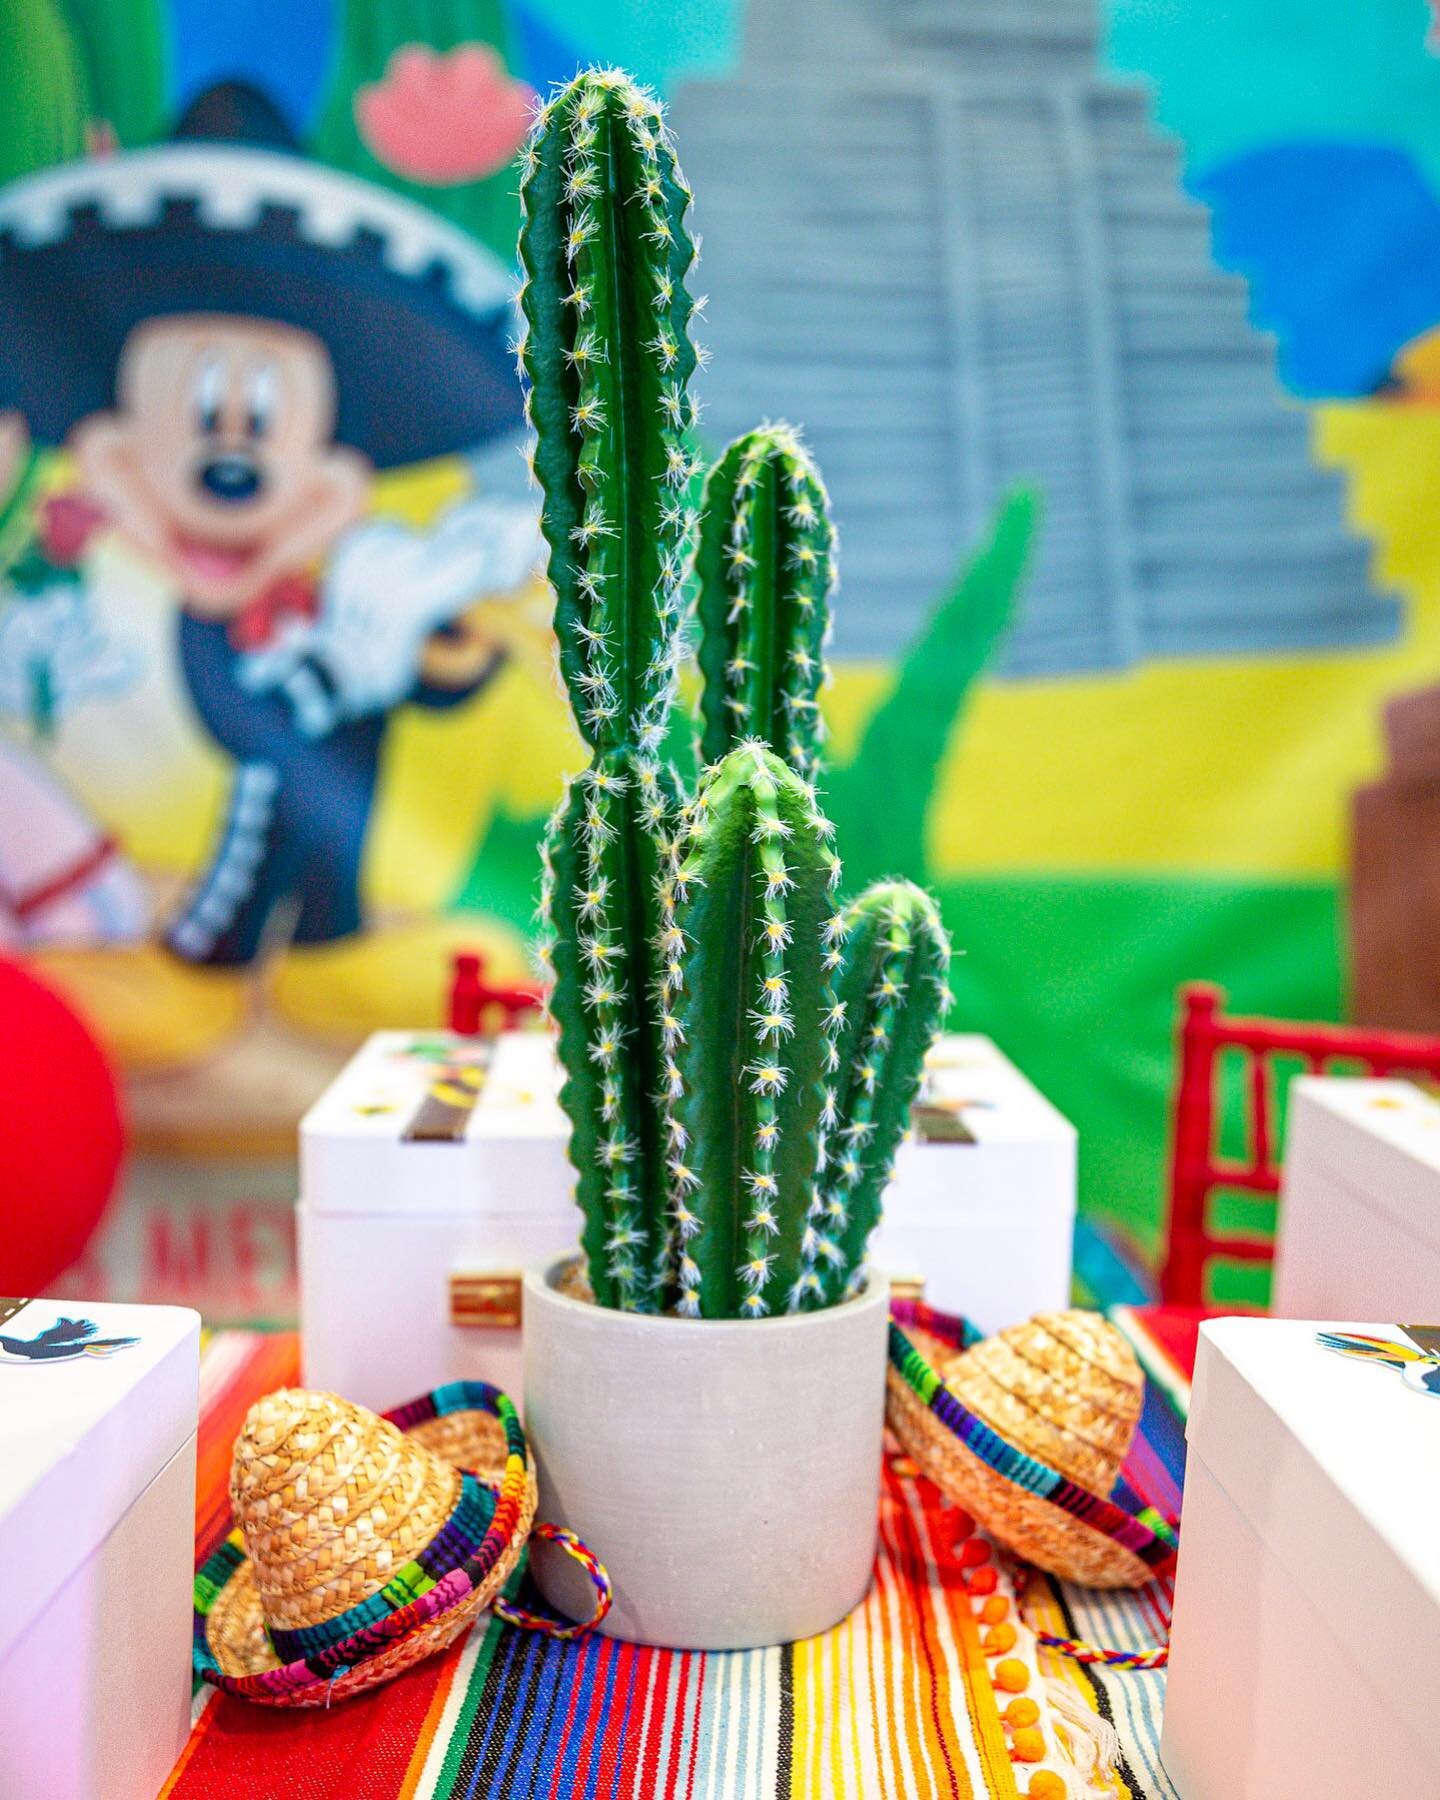 Grab your passports!! Mickey is going to Mexico 😍🌵🌮🇲🇽 #AyomisFirstBirthday 

.
.
.
.
.
event &amp; balloon design: @_creativisuals 
custom suitcases: @ndyjewels 
📸: @gpmatlanta 
.
.
.
.
.
#CreatiVisualsAndEvents #AtlantaEventDesigner #AtlantaEv